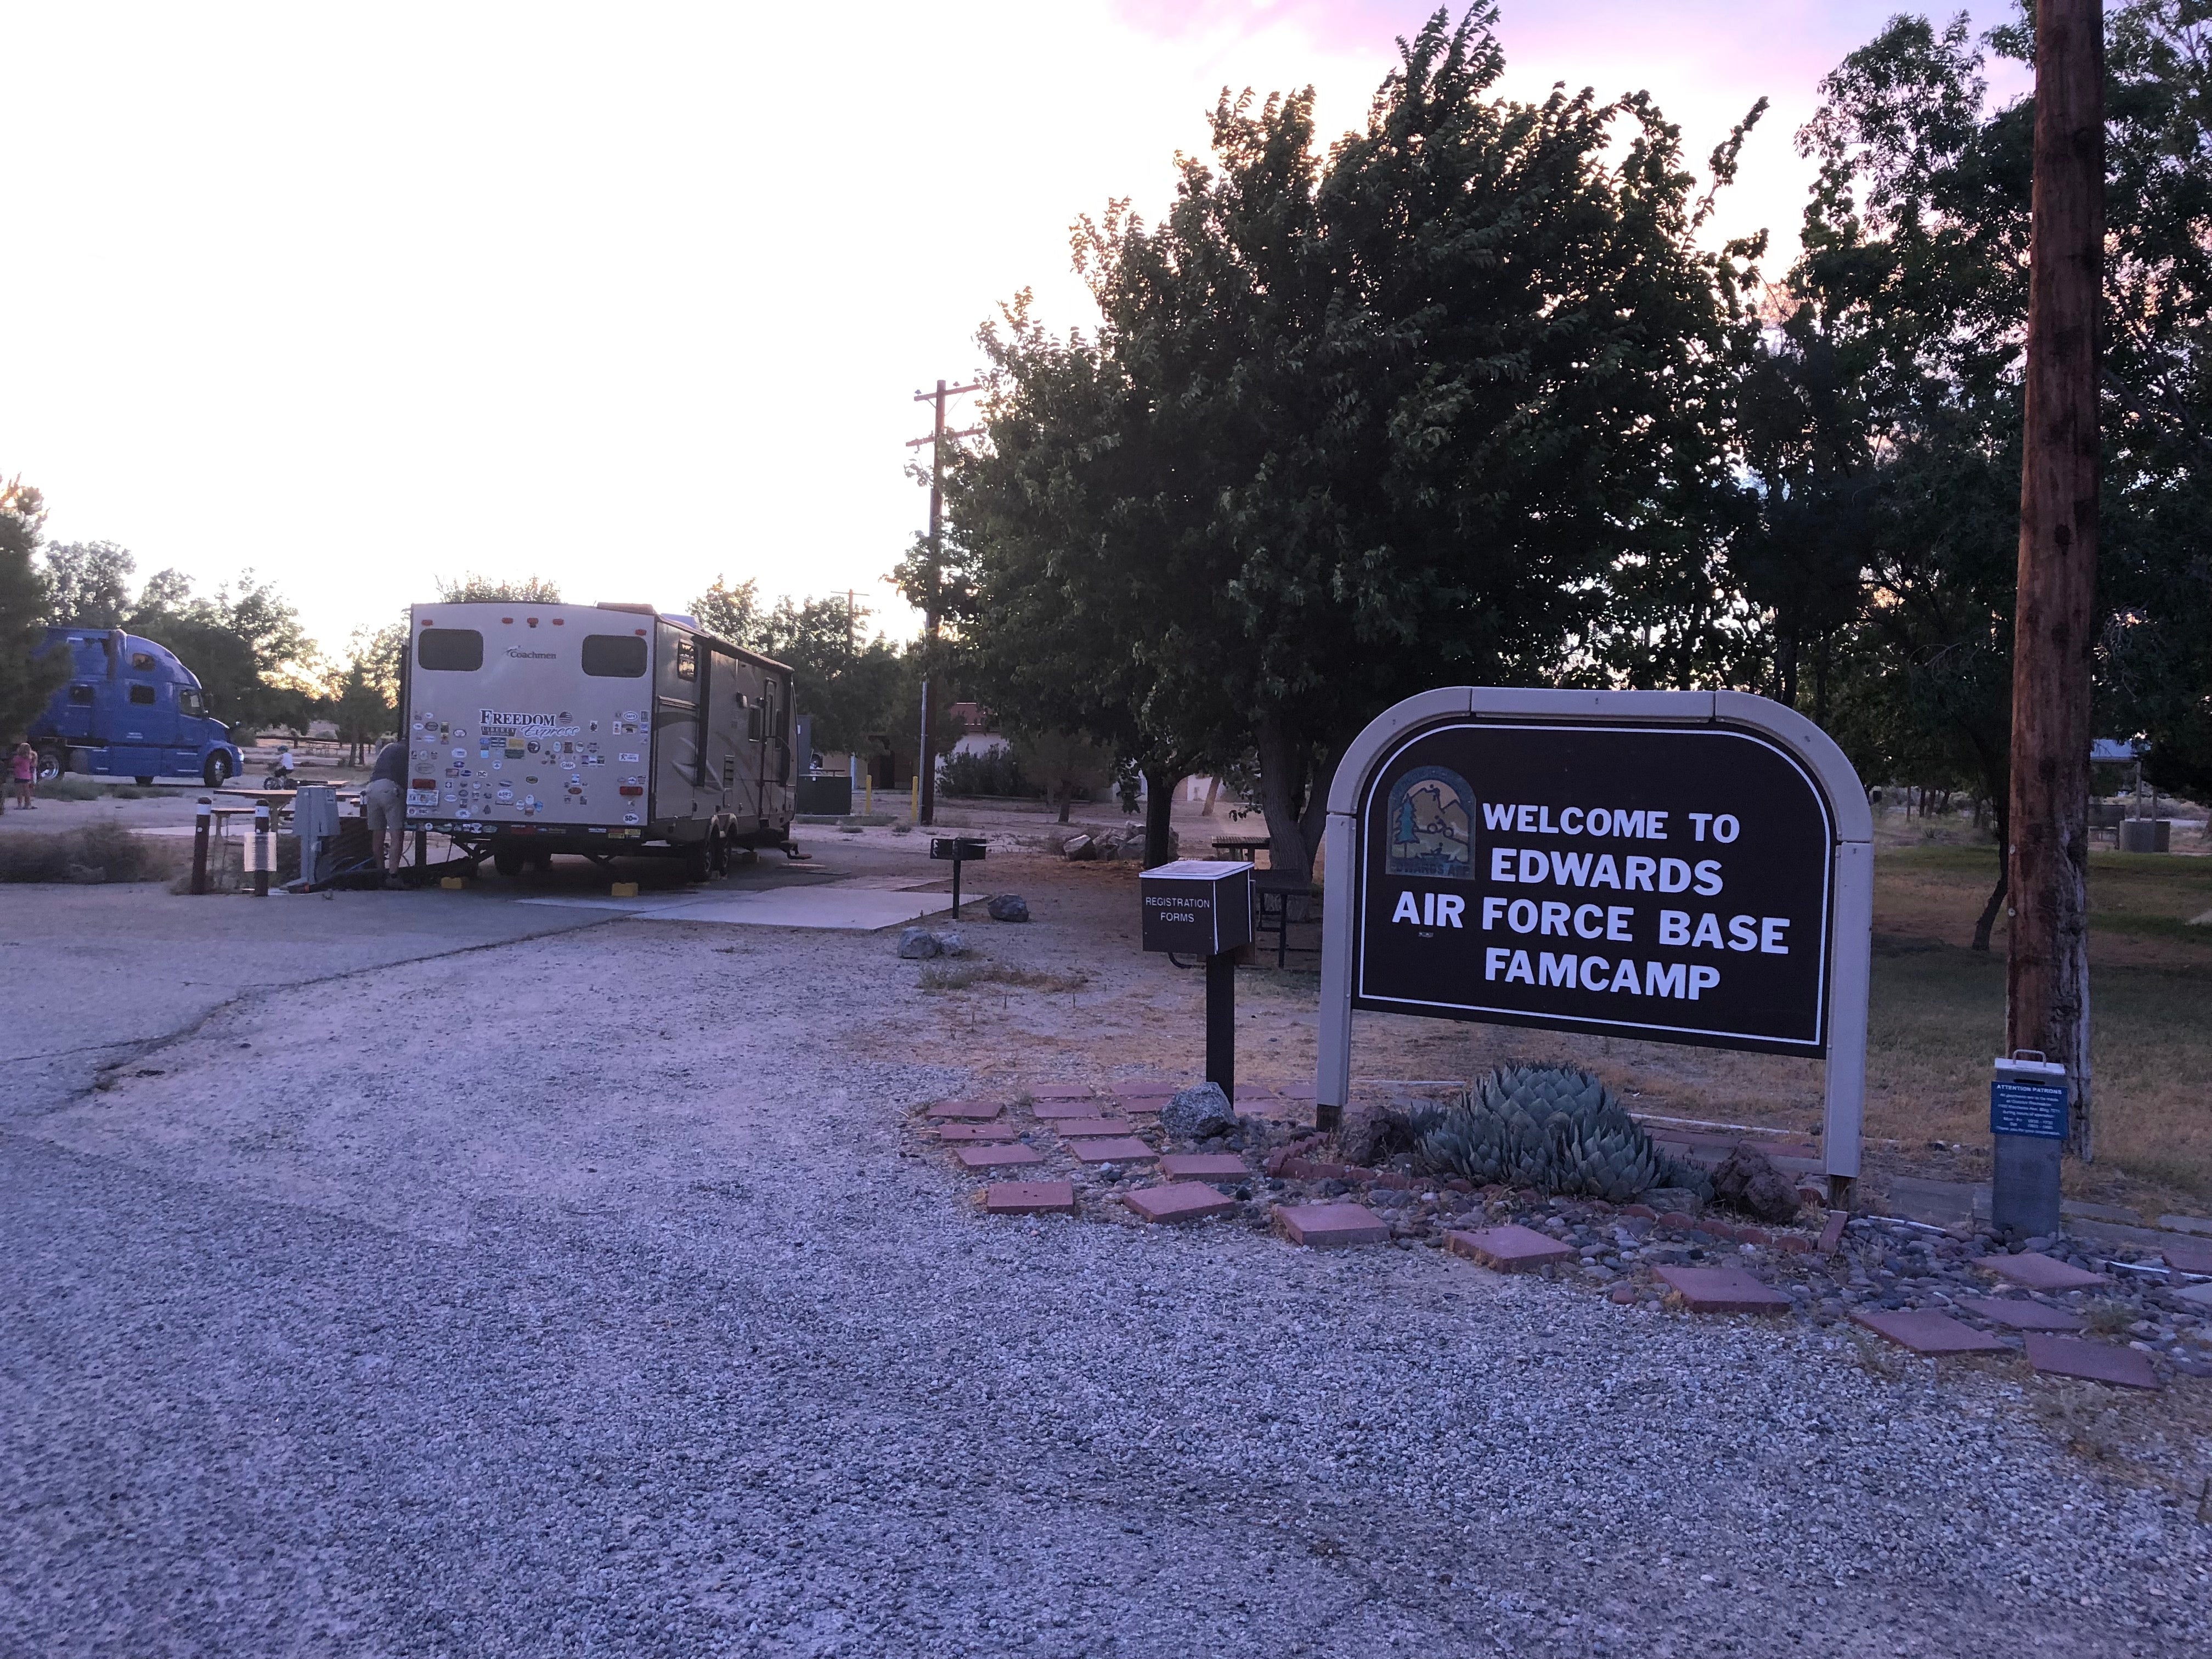 Camper submitted image from Edwards AFB FamCamp - 5